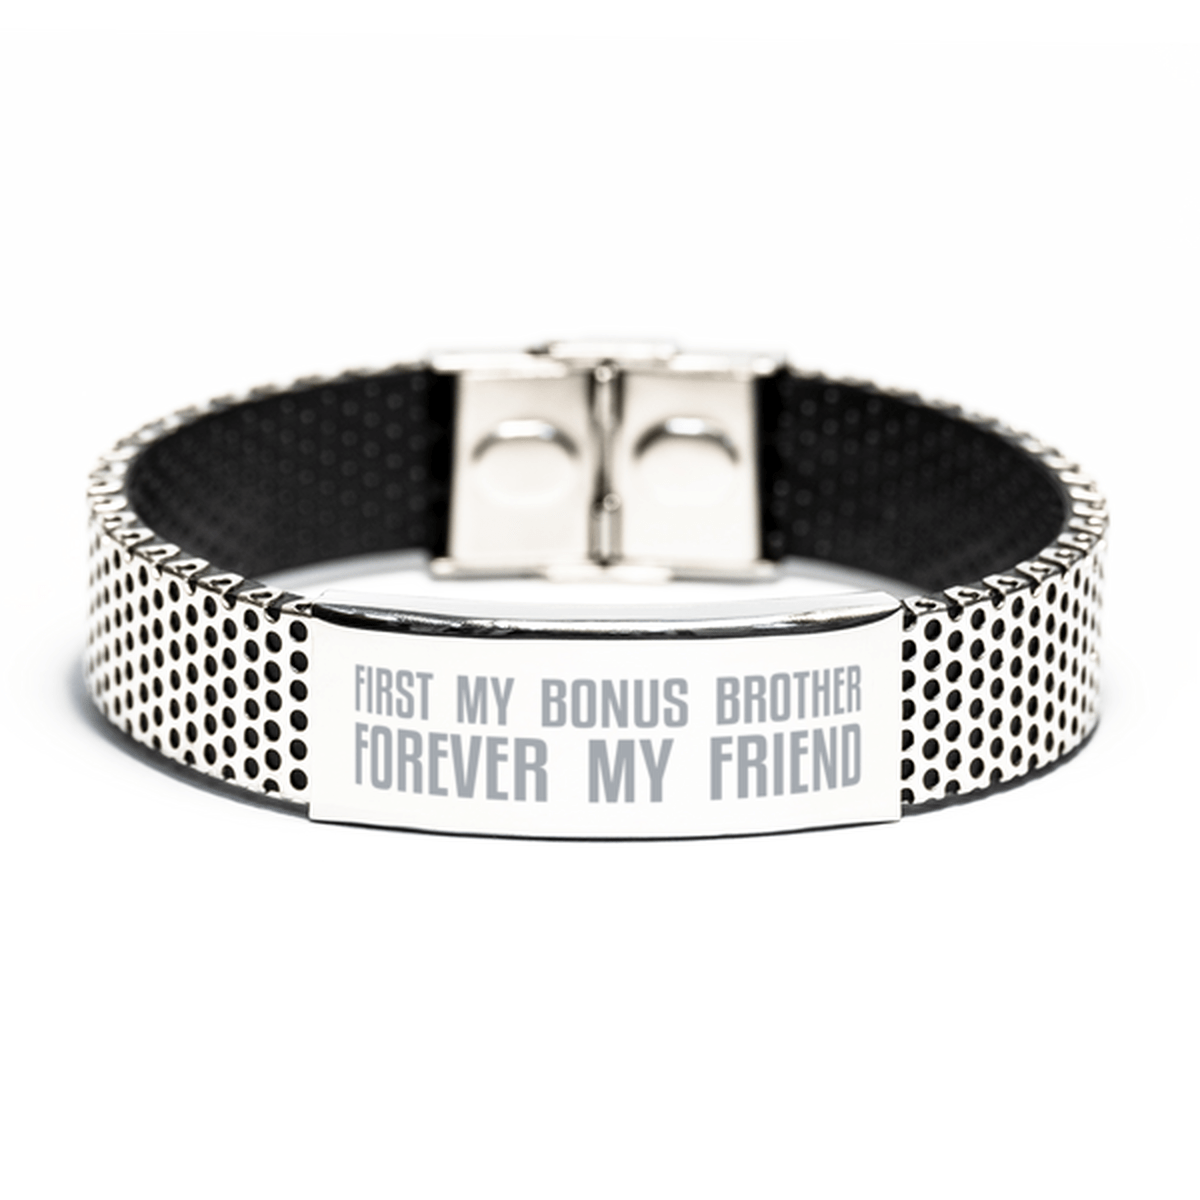 Unique Bonus Brother Stainless Steel Bracelet, First My Bonus Brother Forever My Friend, Best Gift for Stepbrother Brother-in-Law Birthday, Christmas